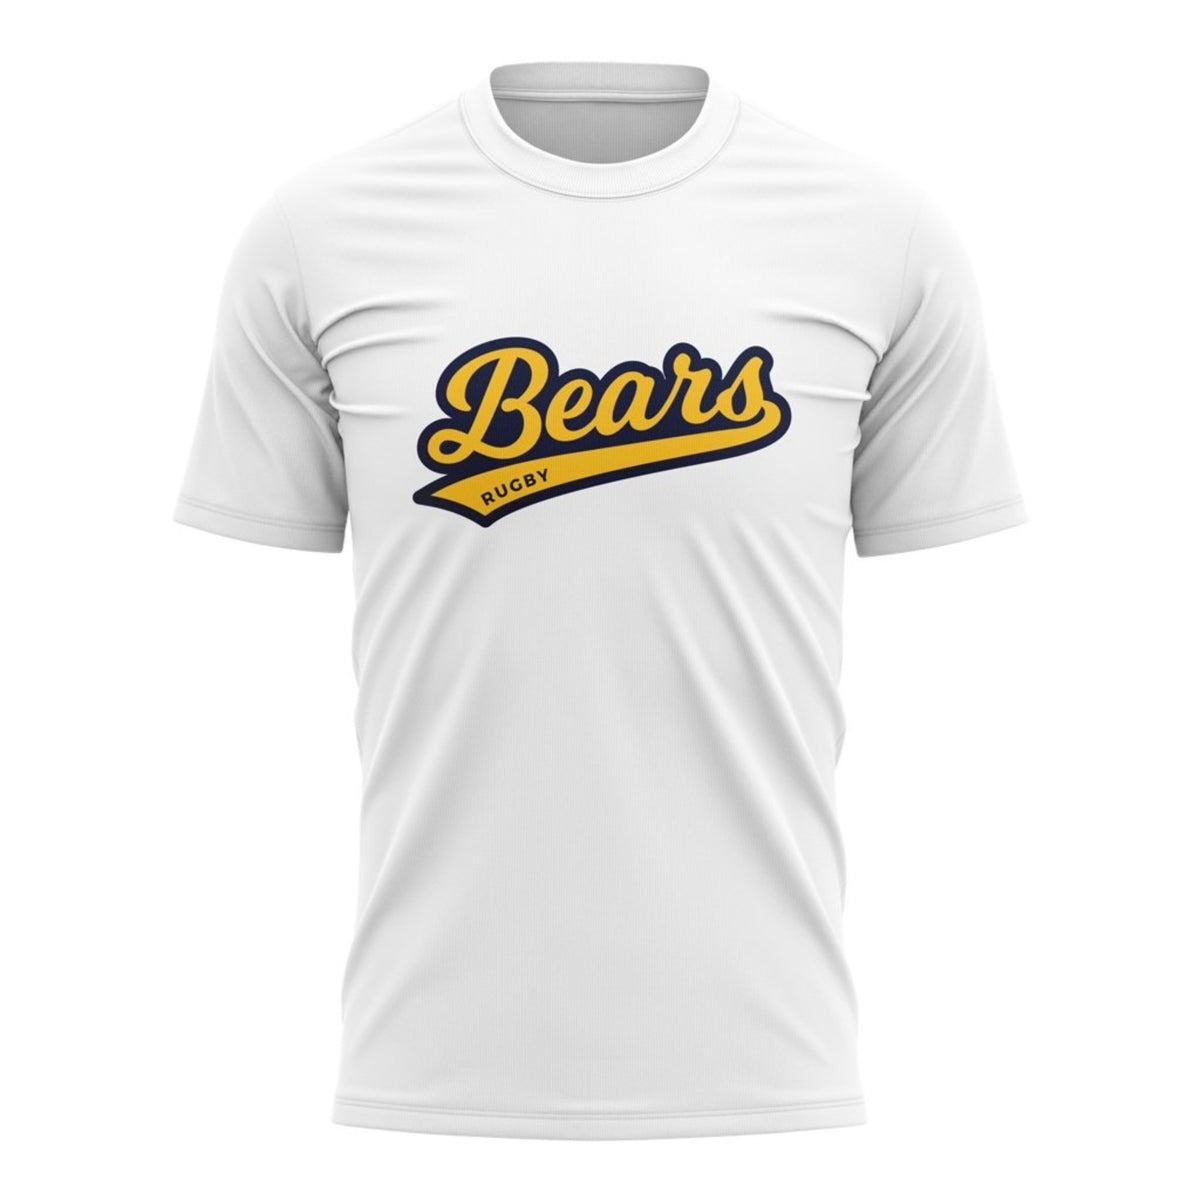 BC Rugby 2021 &quot;Bears&quot; Tee - Men&#39;s White/Gold - www.therugbyshop.com www.therugbyshop.com MEN&#39;S / WHITE / S XIX Brands TEES BC Rugby 2021 &quot;Bears&quot; Tee - Men&#39;s White/Gold